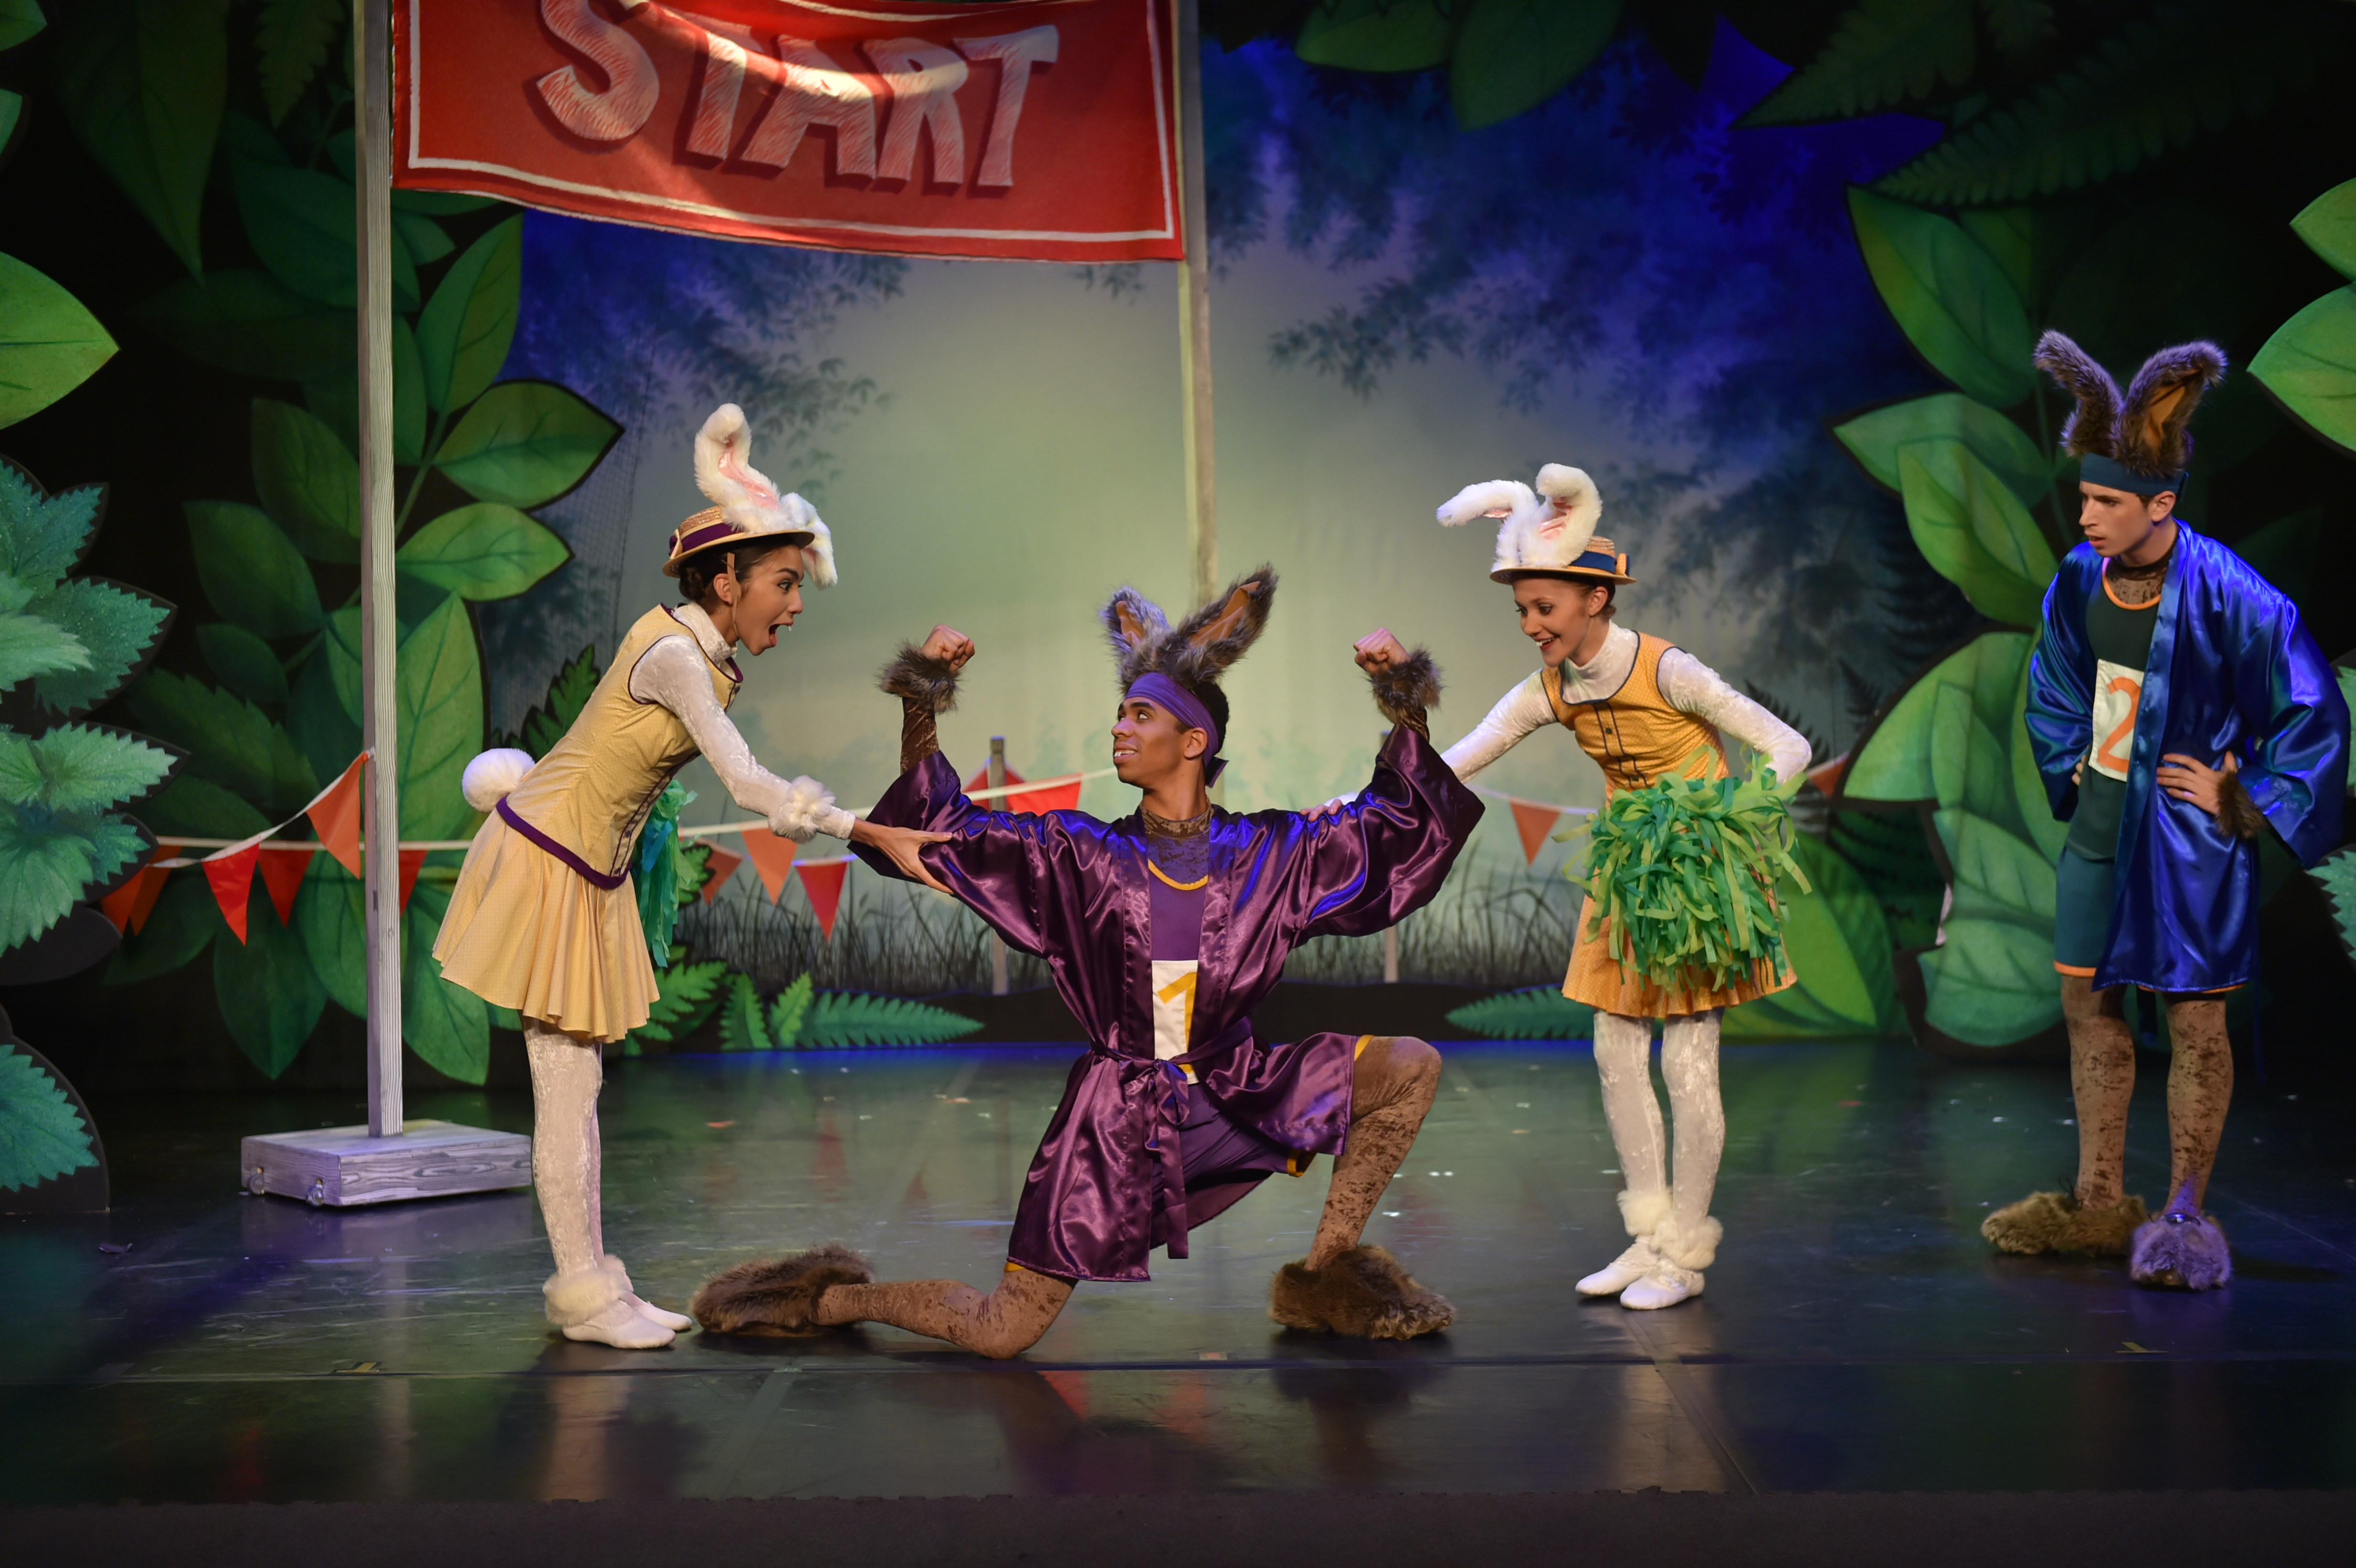 Four dancers on stage dressed as rabbits. One male dancer dressed in a purple gown is kneeling on one knee flexing his biceps and the two female dancers both wearing yellow dresses have one hand on each of his biceps. A male actor dressed in a blue gown is standing in the background with his hands on his hips.